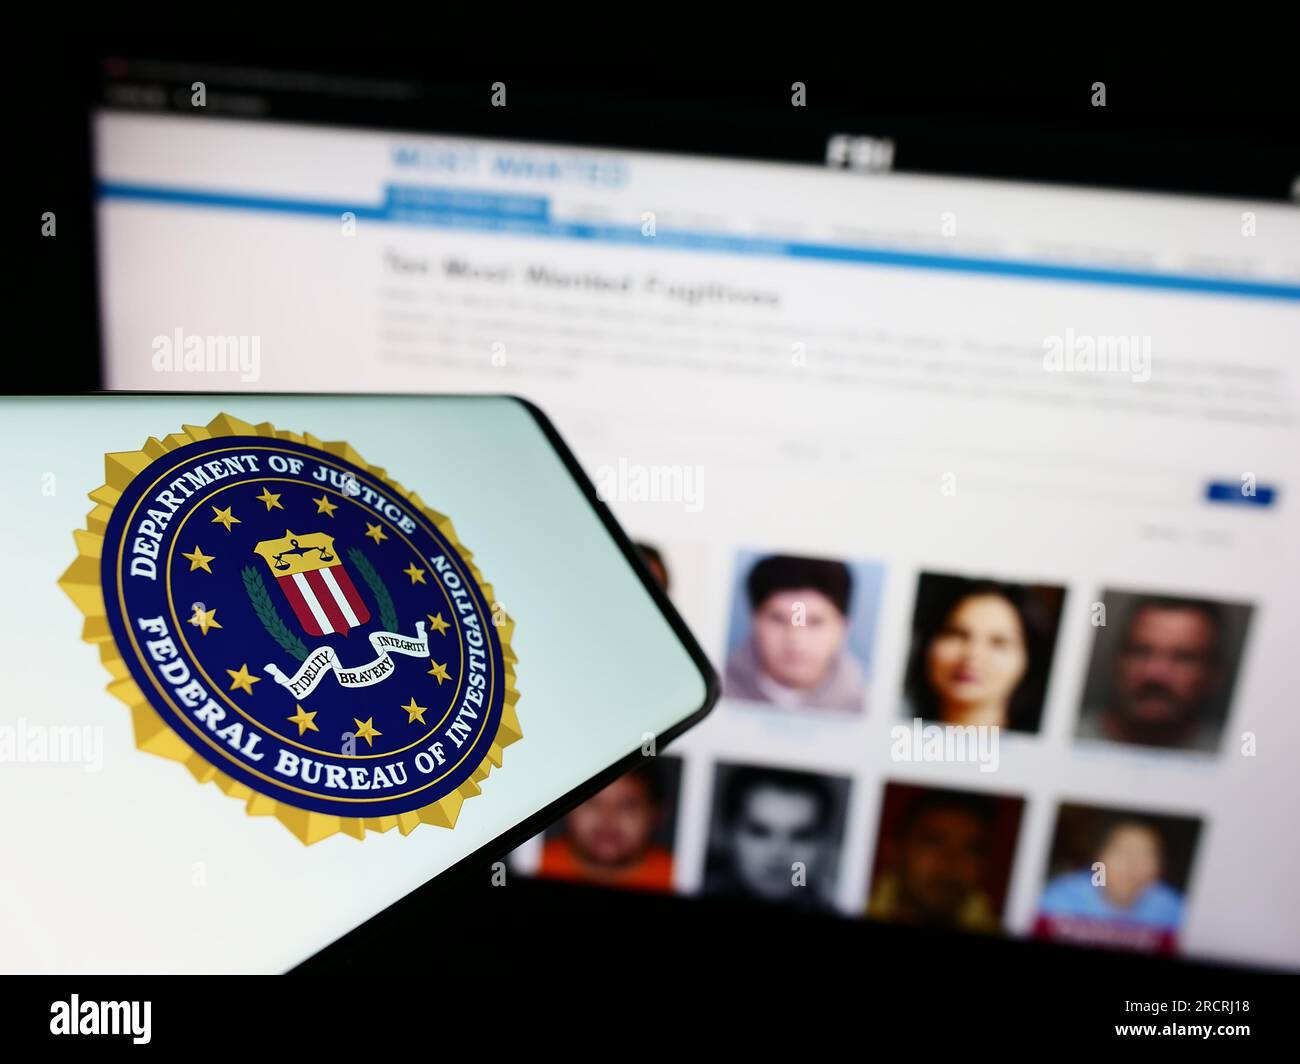 Mobile phone with seal of US Federal Bureau of Investigation (FBI) on screen in front of website. Focus on center of phone display. Stock Photo